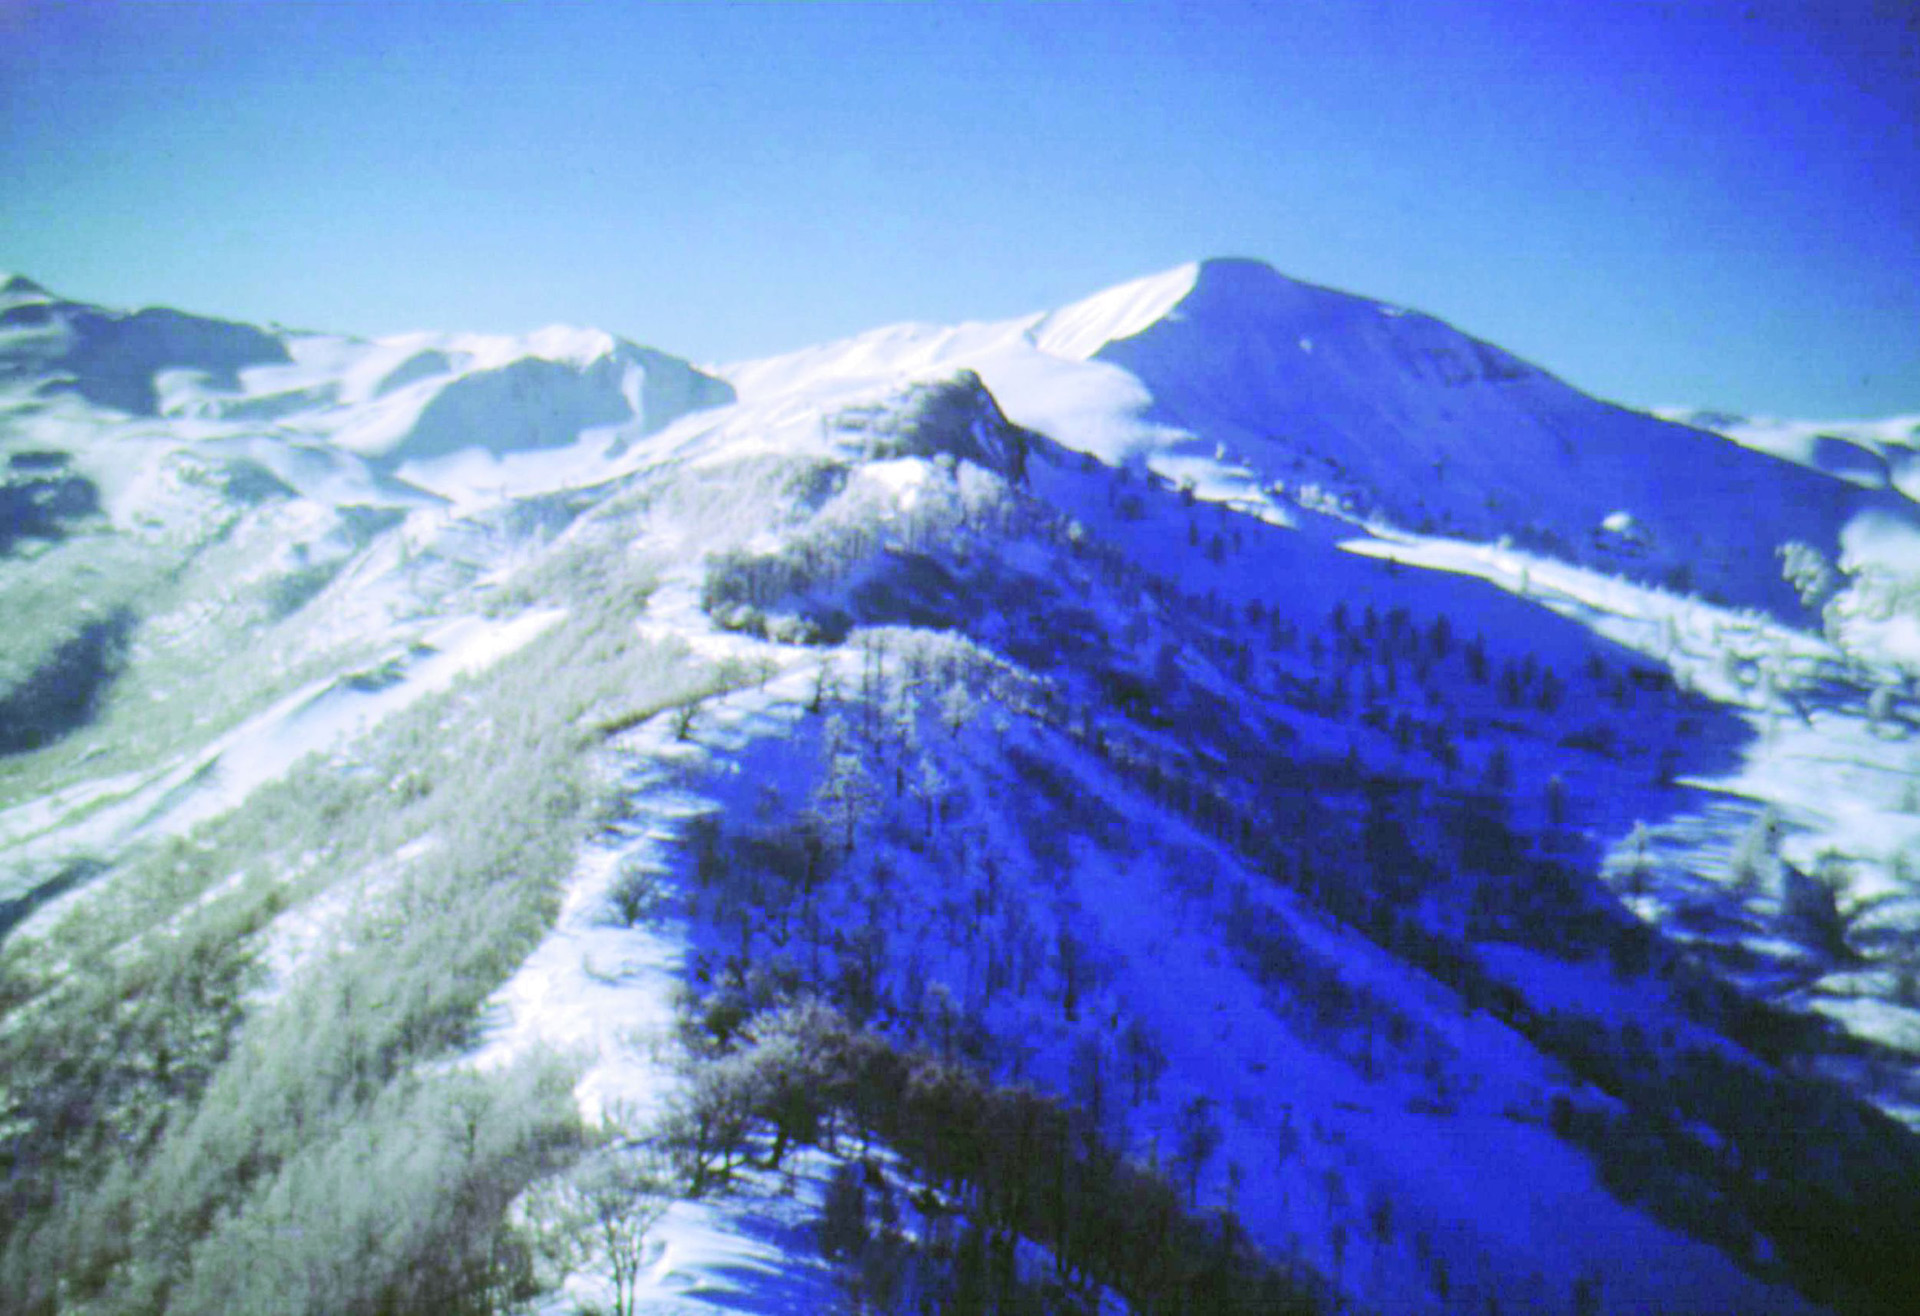 A view of snow-covered Riva Ridge reveals the formidable features of the 10th Mountain Division’s objective.